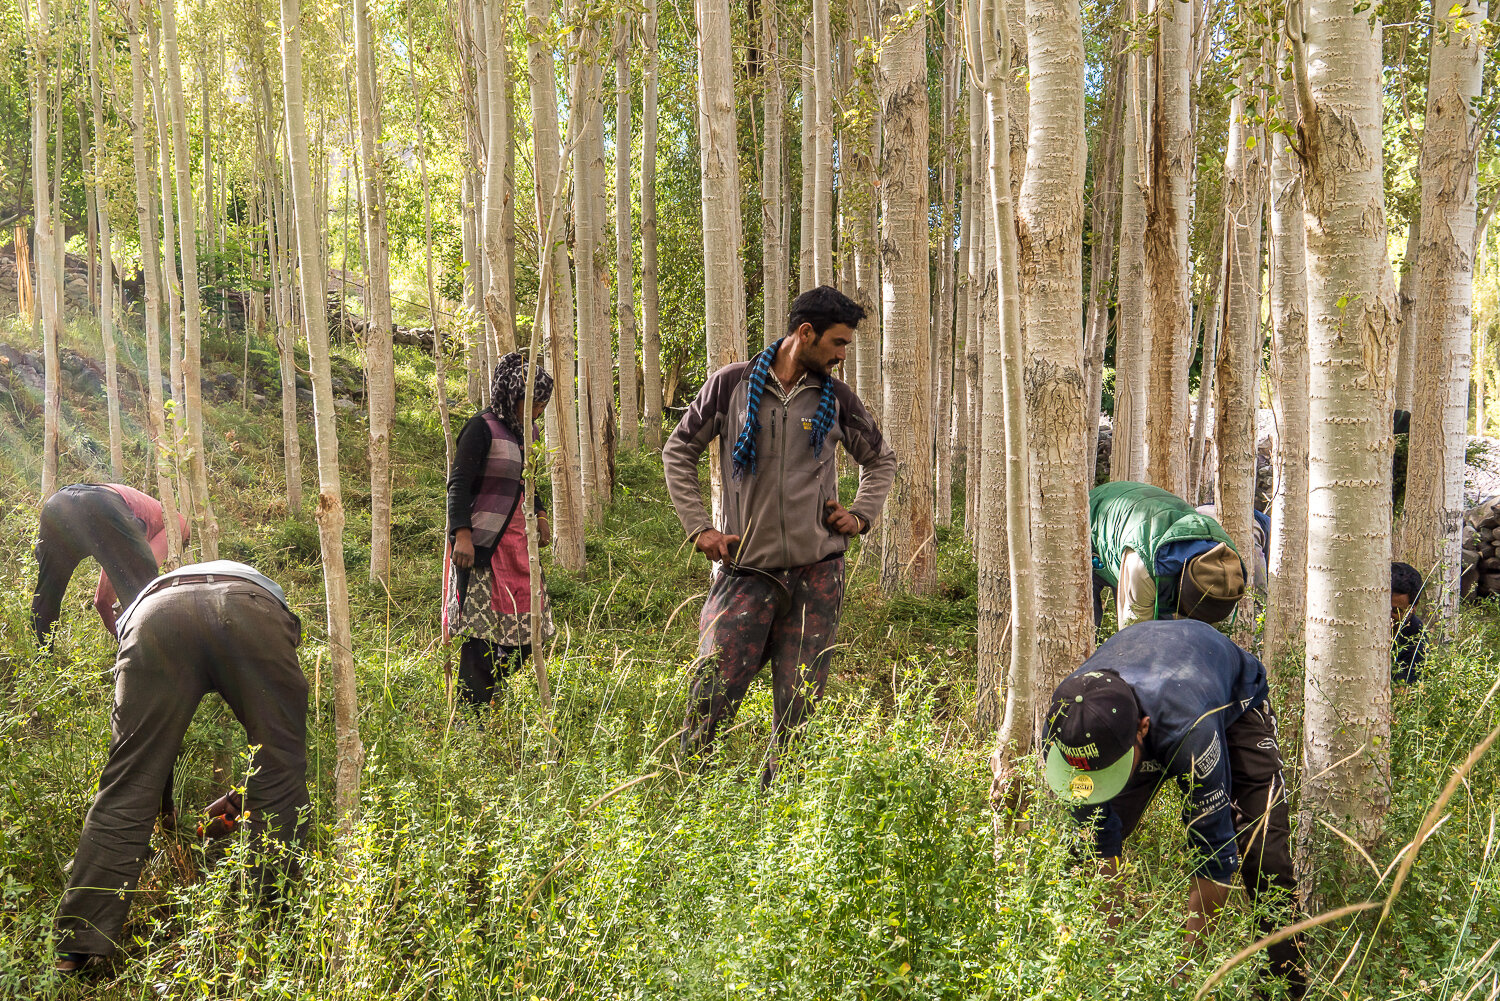  Nirmal Singh, center, and other migrant workers from northern India cut plants for winter fodder for animals in a poplar grove on Sunday, August 11, 2019 in Alchi, Ladakh, India. 